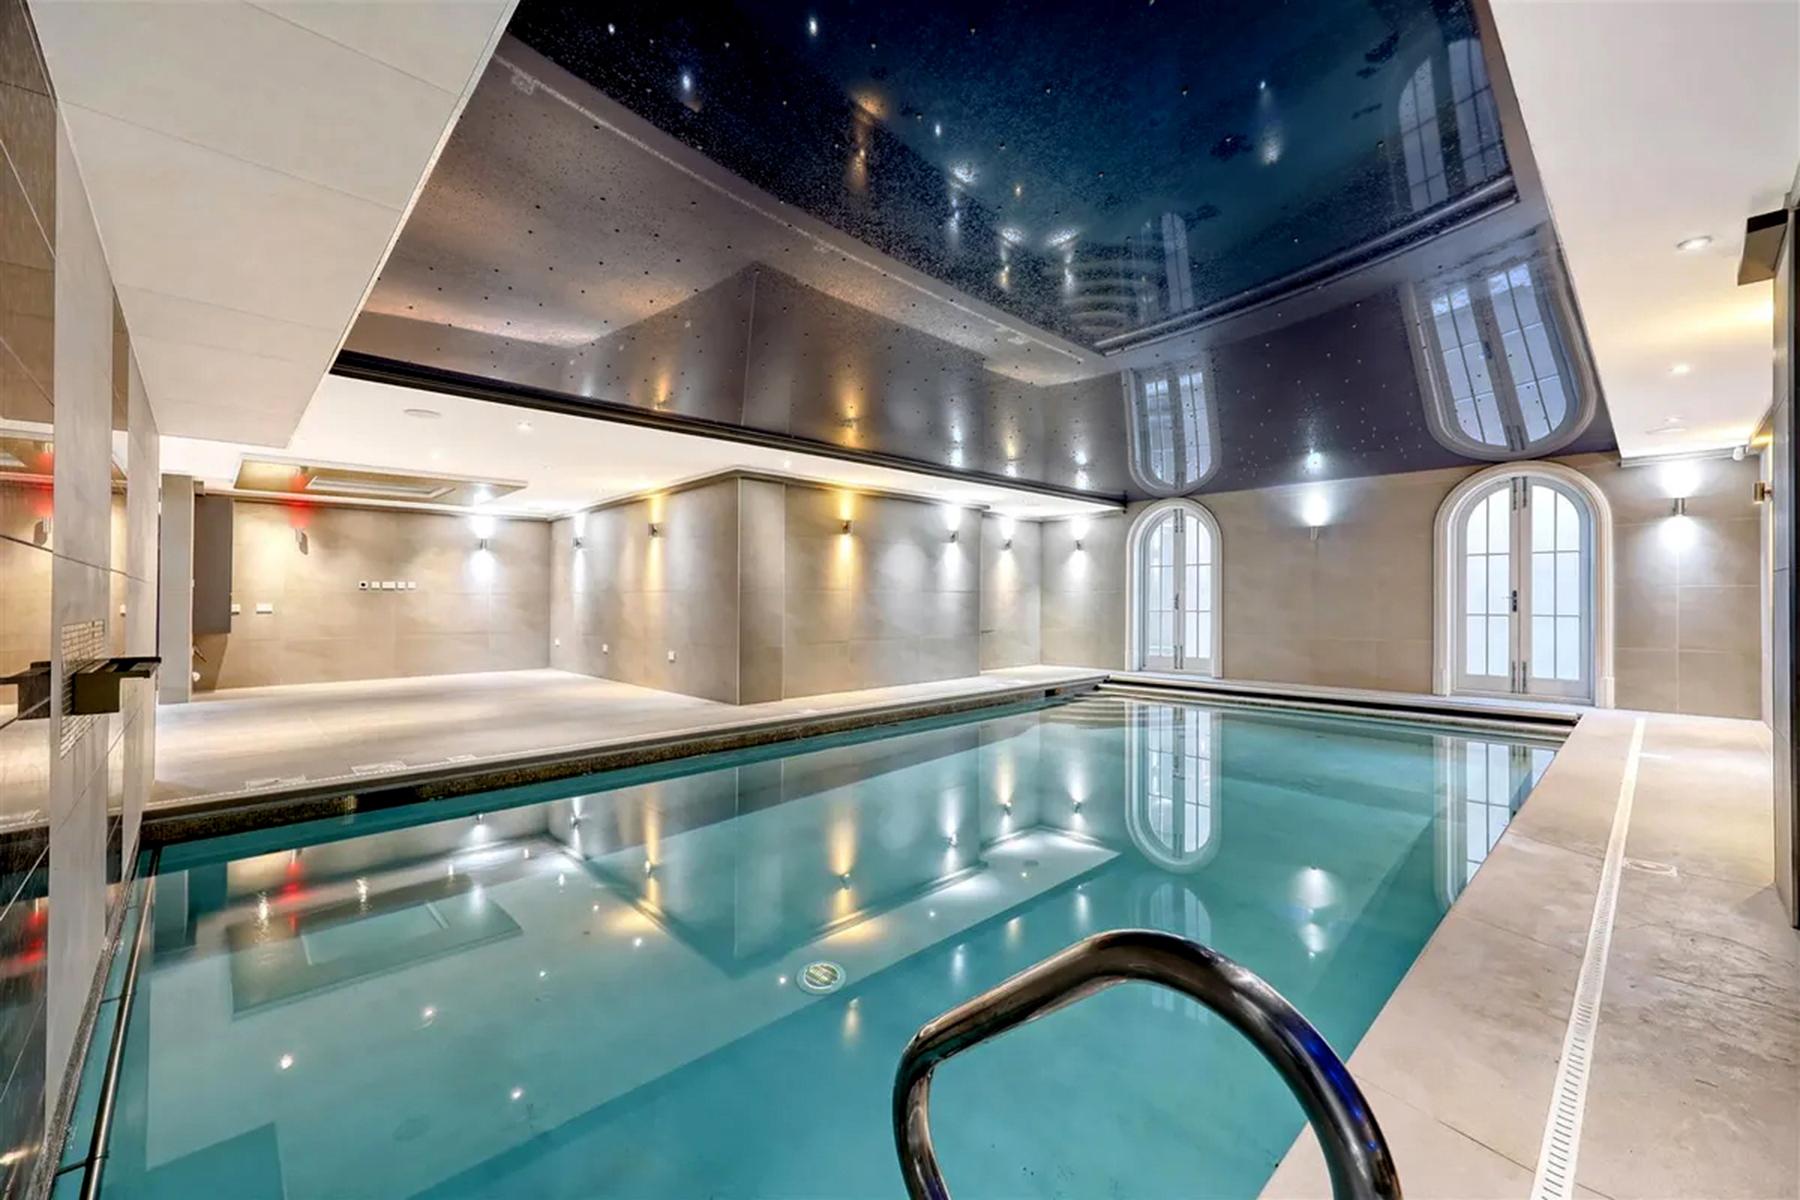 The Essex Mansion & Spa, Chigwell, The Essex Mansion & Spa photo #1